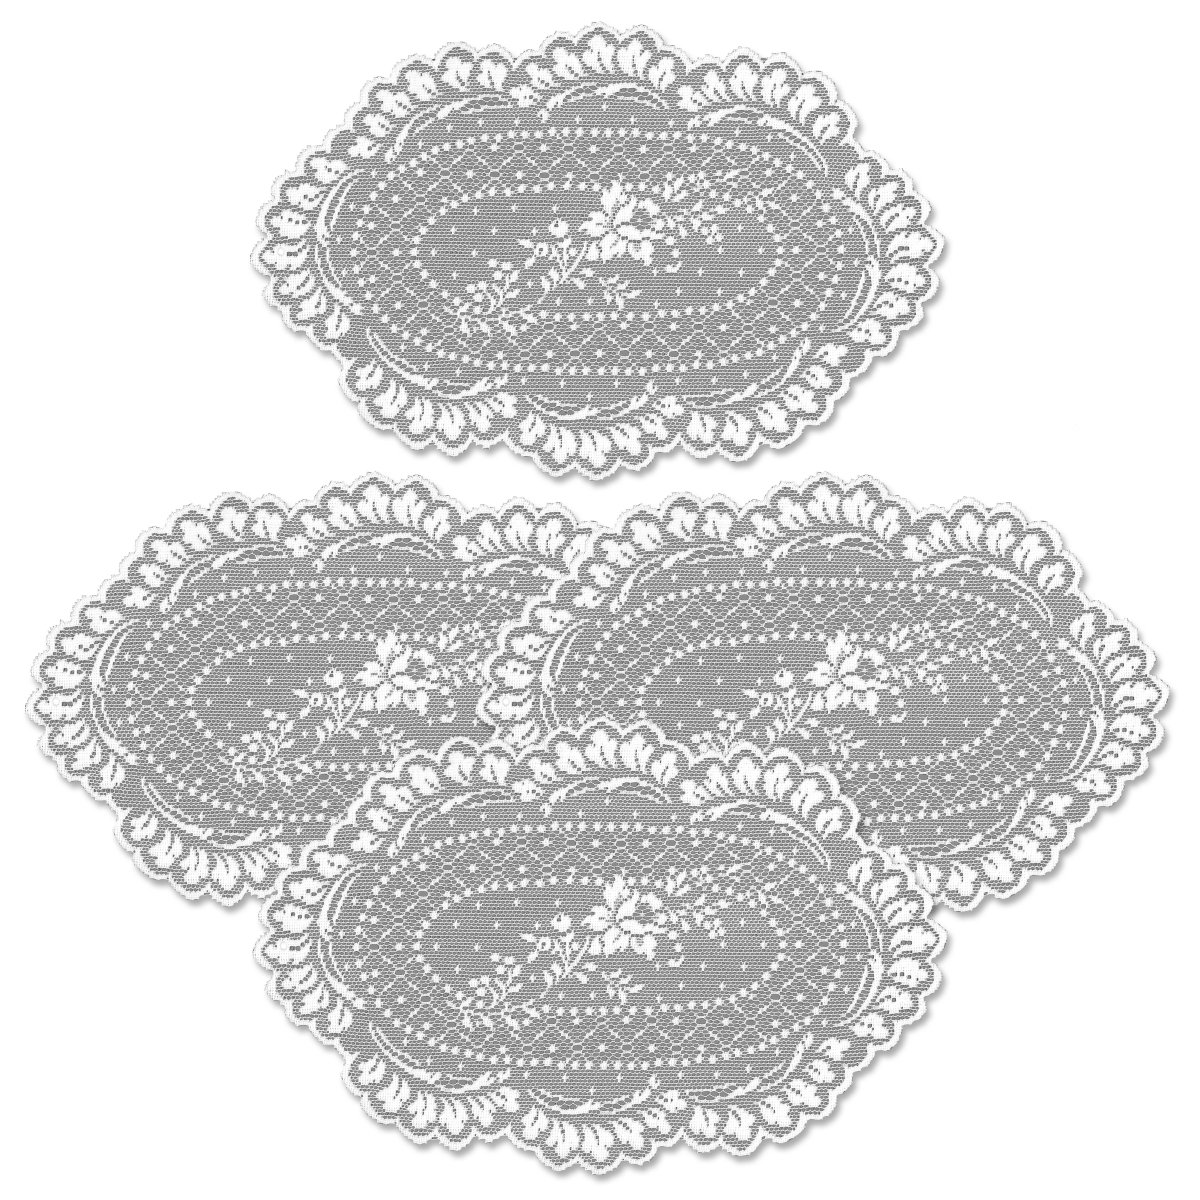 Picture of Heritage Lace FO-0812W-S 8 x 12 in. Floret Doily - White - Set of 4